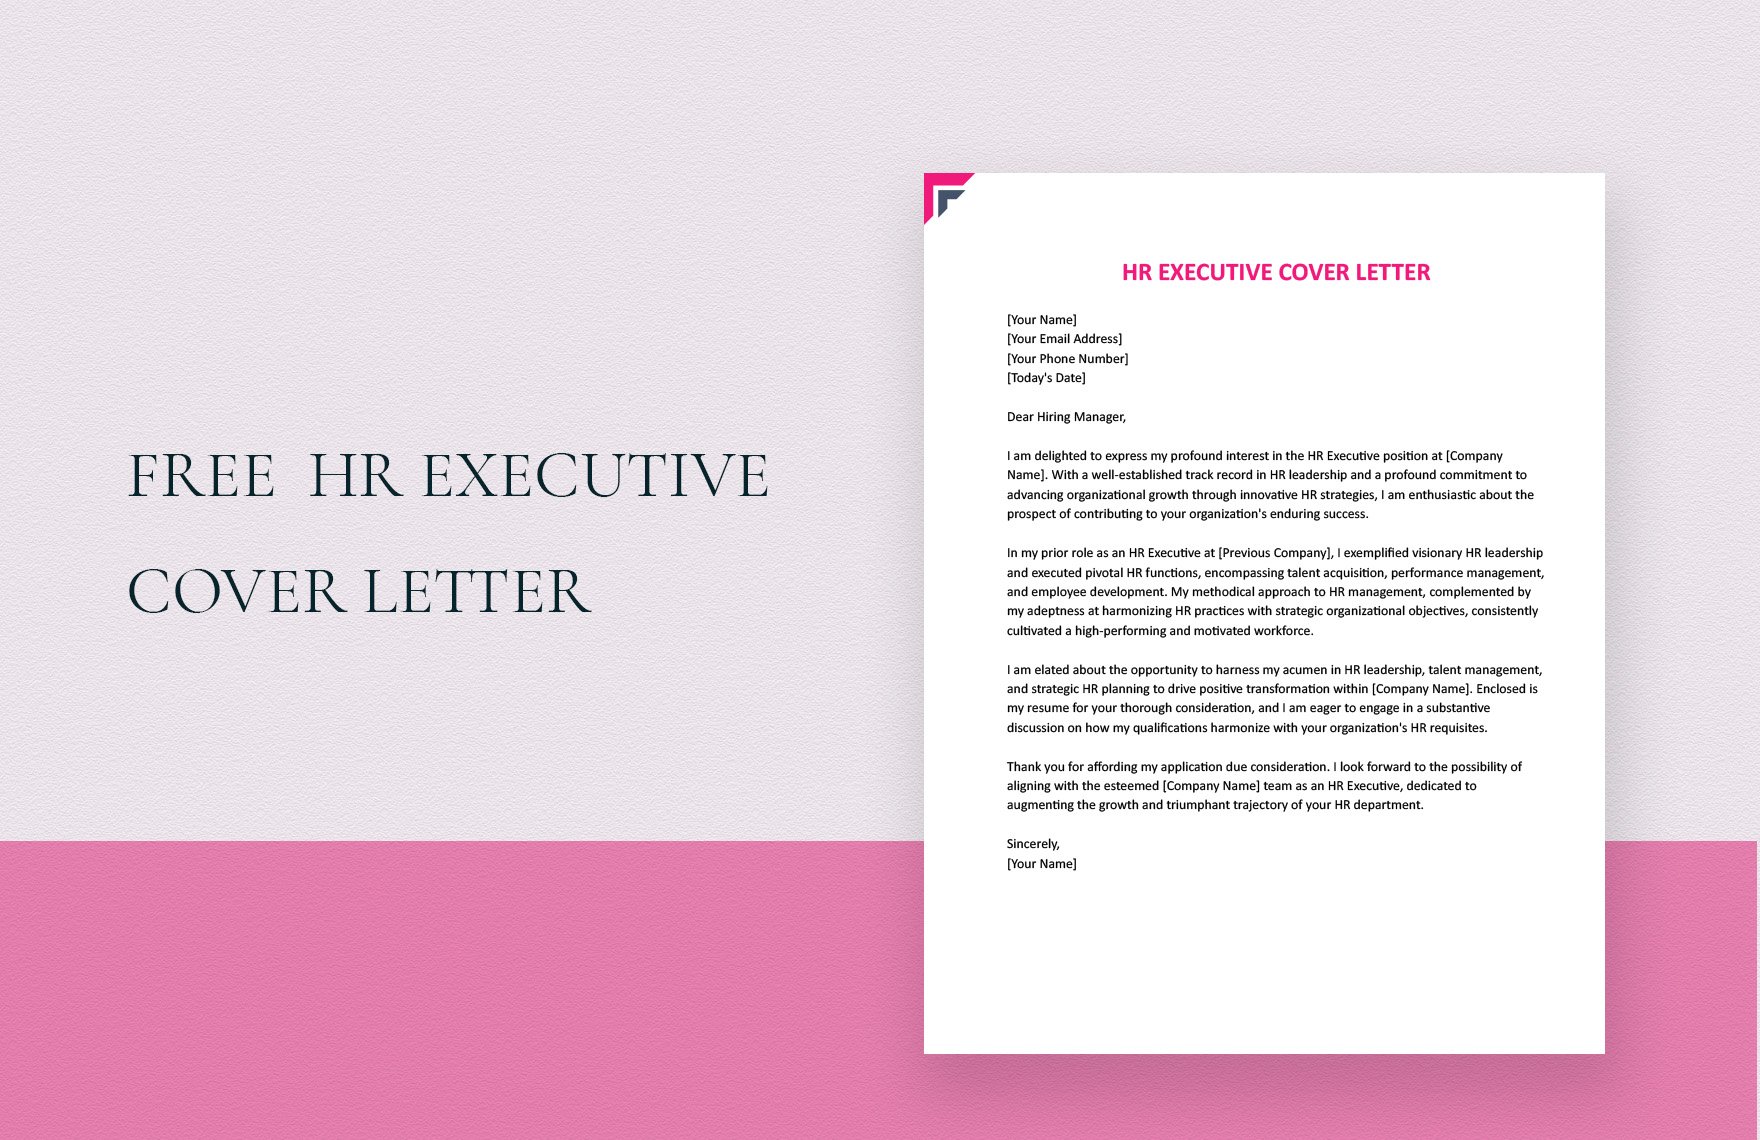 HR Executive Cover Letter